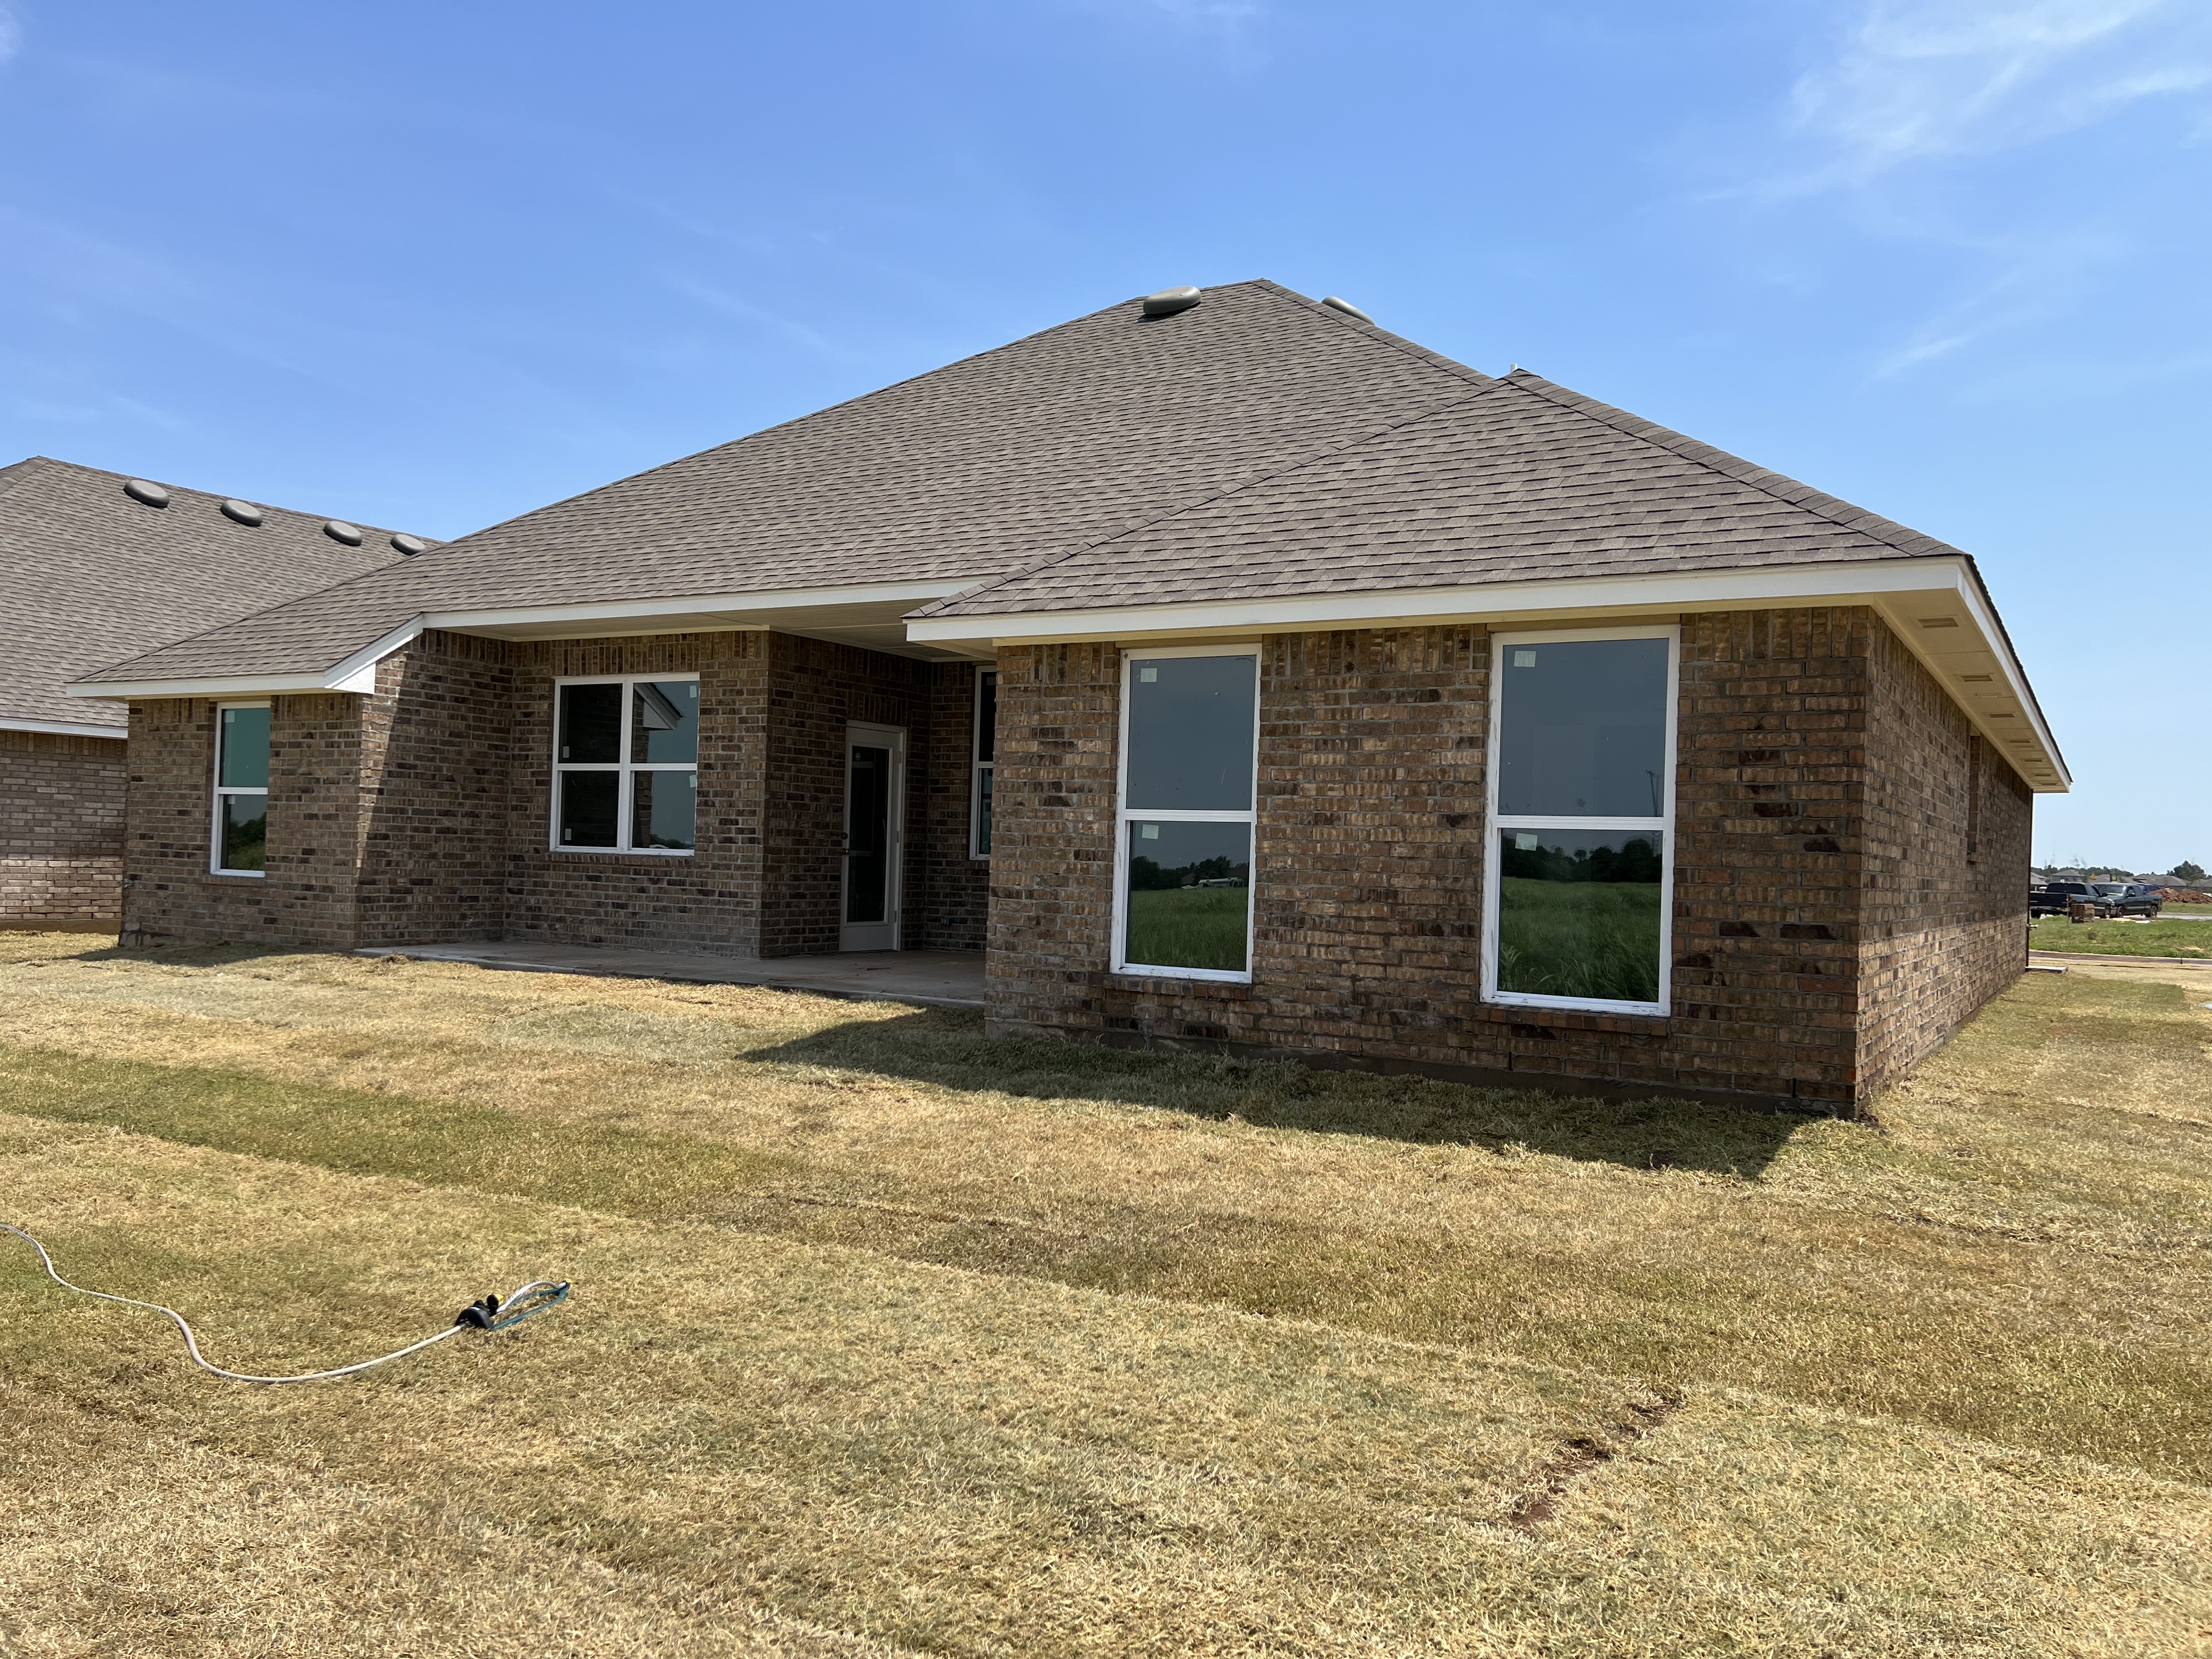 1189 NW 12th Street, Newcastle, Oklahoma 73065, 4 Bedrooms Bedrooms, ,2 BathroomsBathrooms,House,For Sale,NW 12th Street,1391